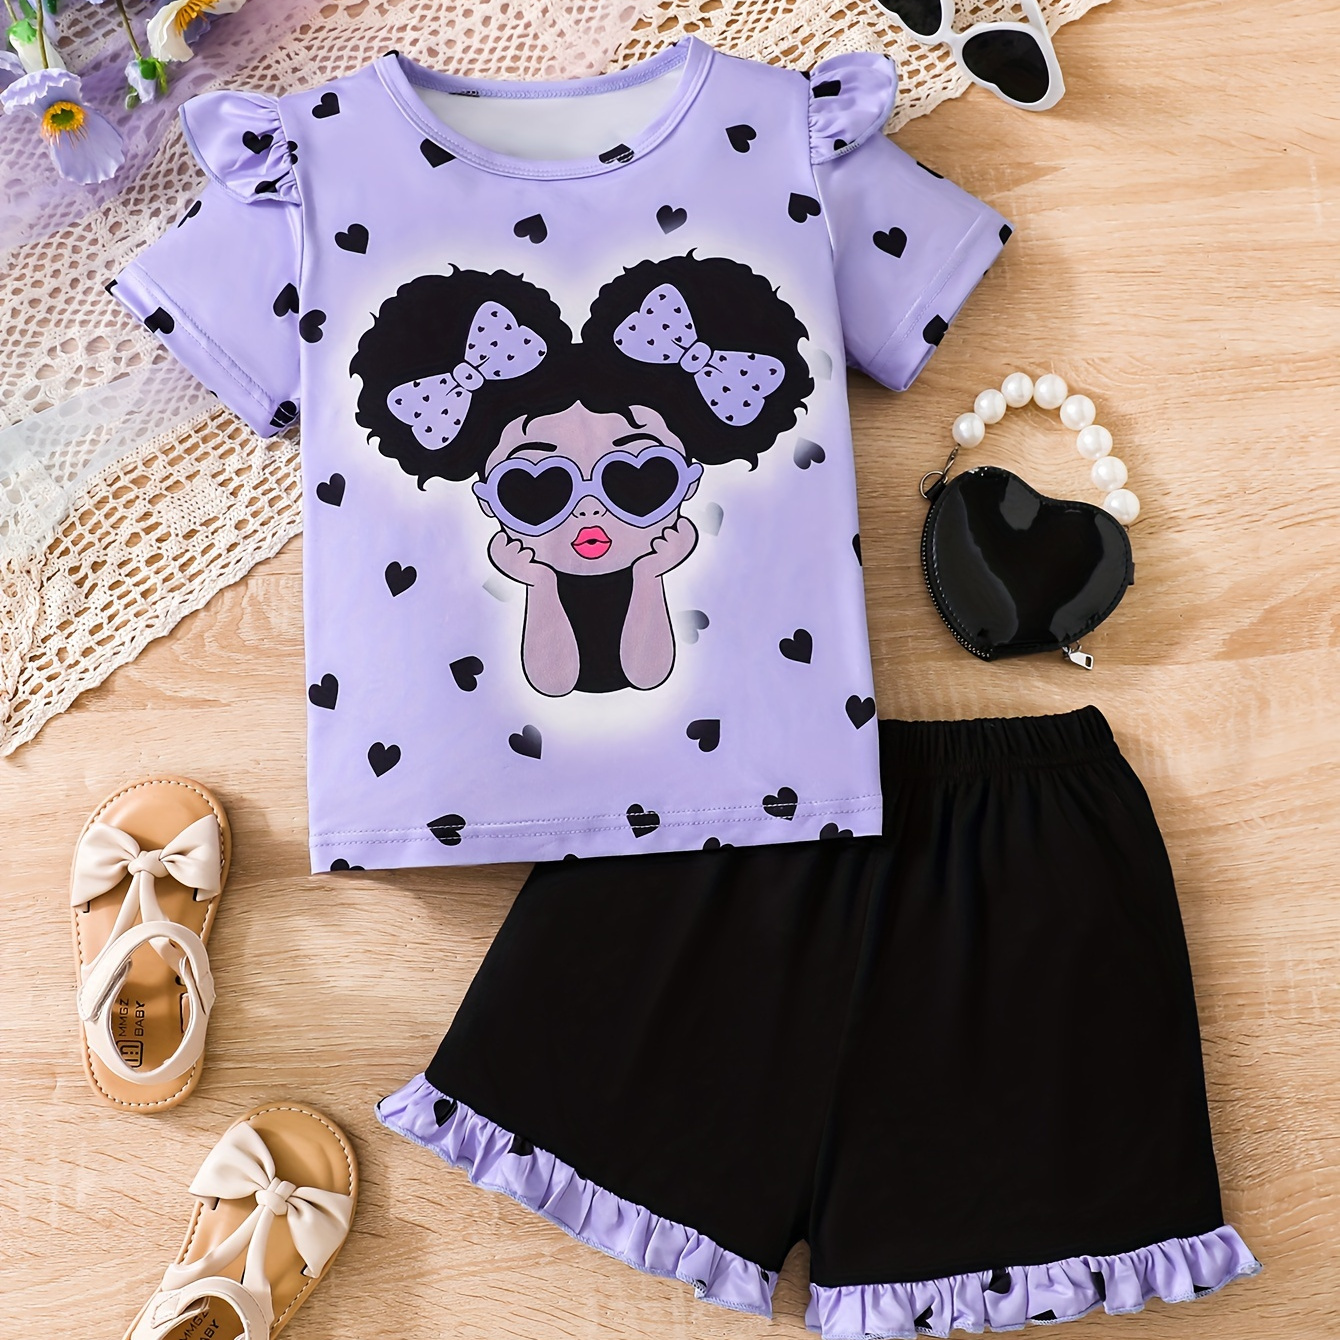 

Cute Hearts Full Print Girls Outfit 2pcs Short Sleeve Portrait Graphic Top & Ruffle Stitching Shorts Set Holiday Summer Clothes